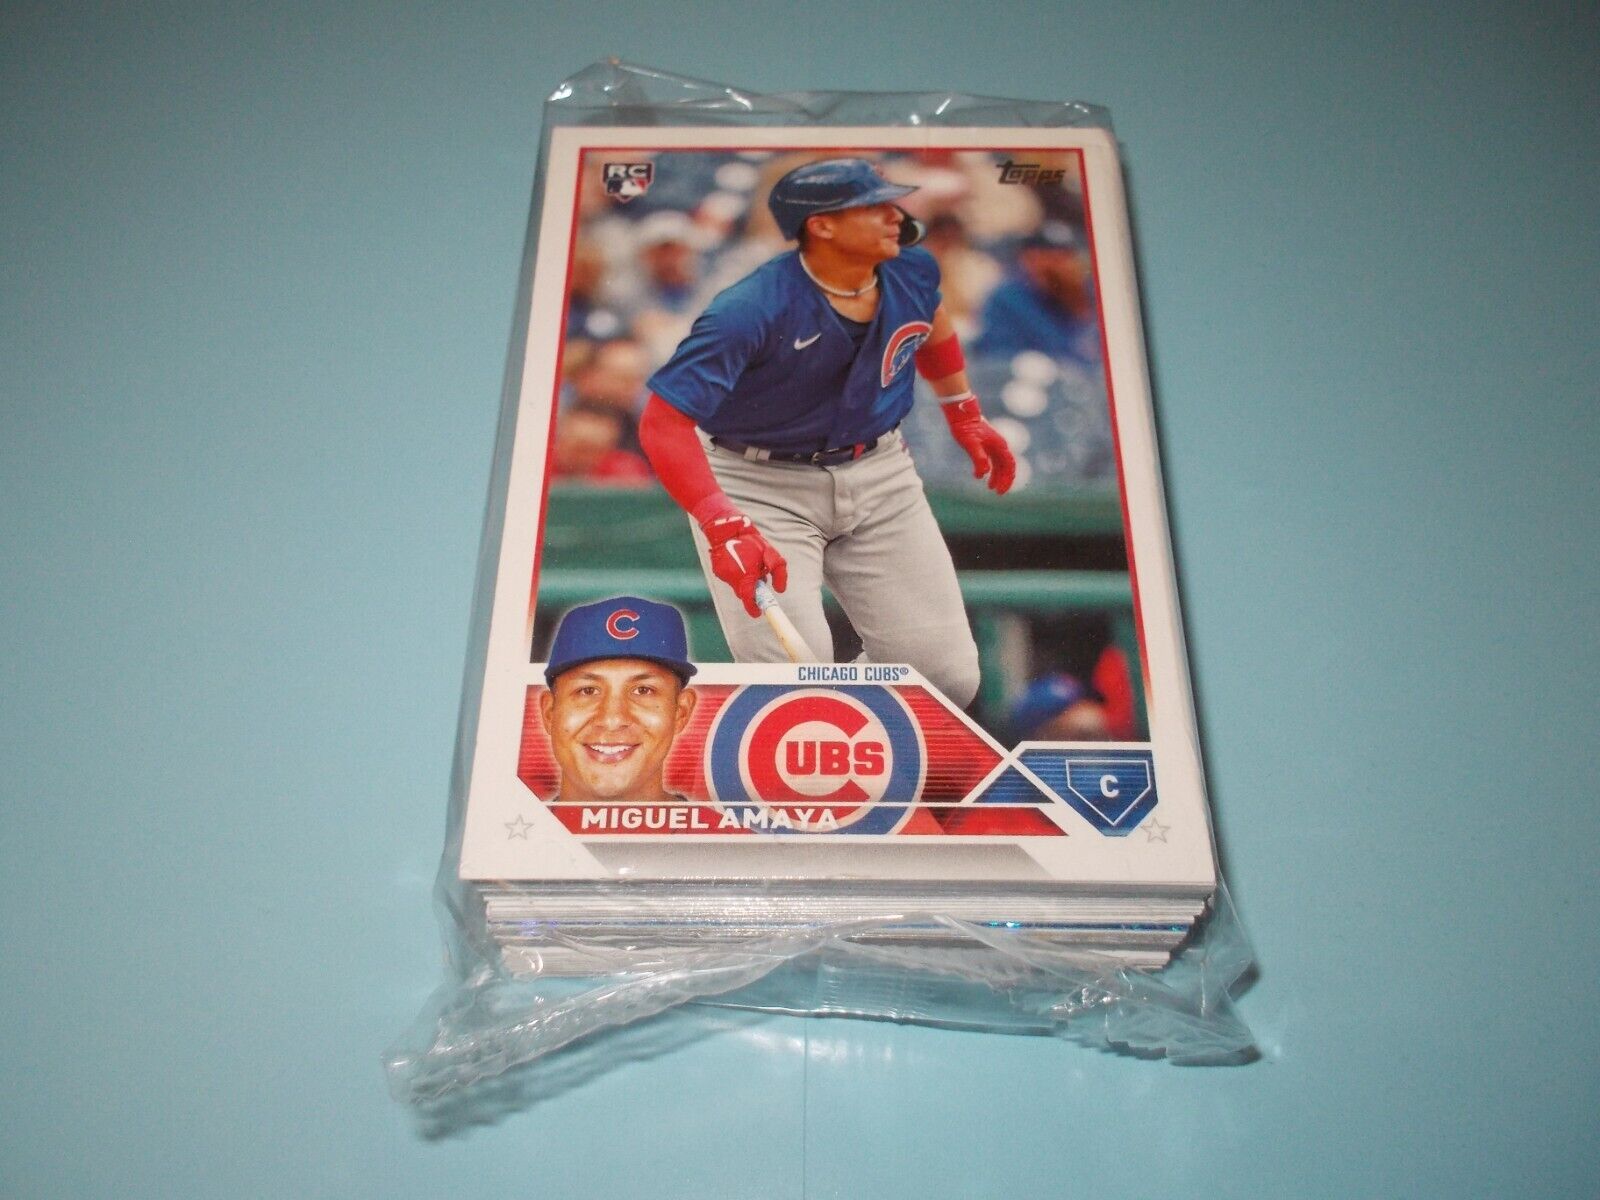 2023 Topps update Miguel Amaya top Hanger pack sealed Chicago Cubs rookie card